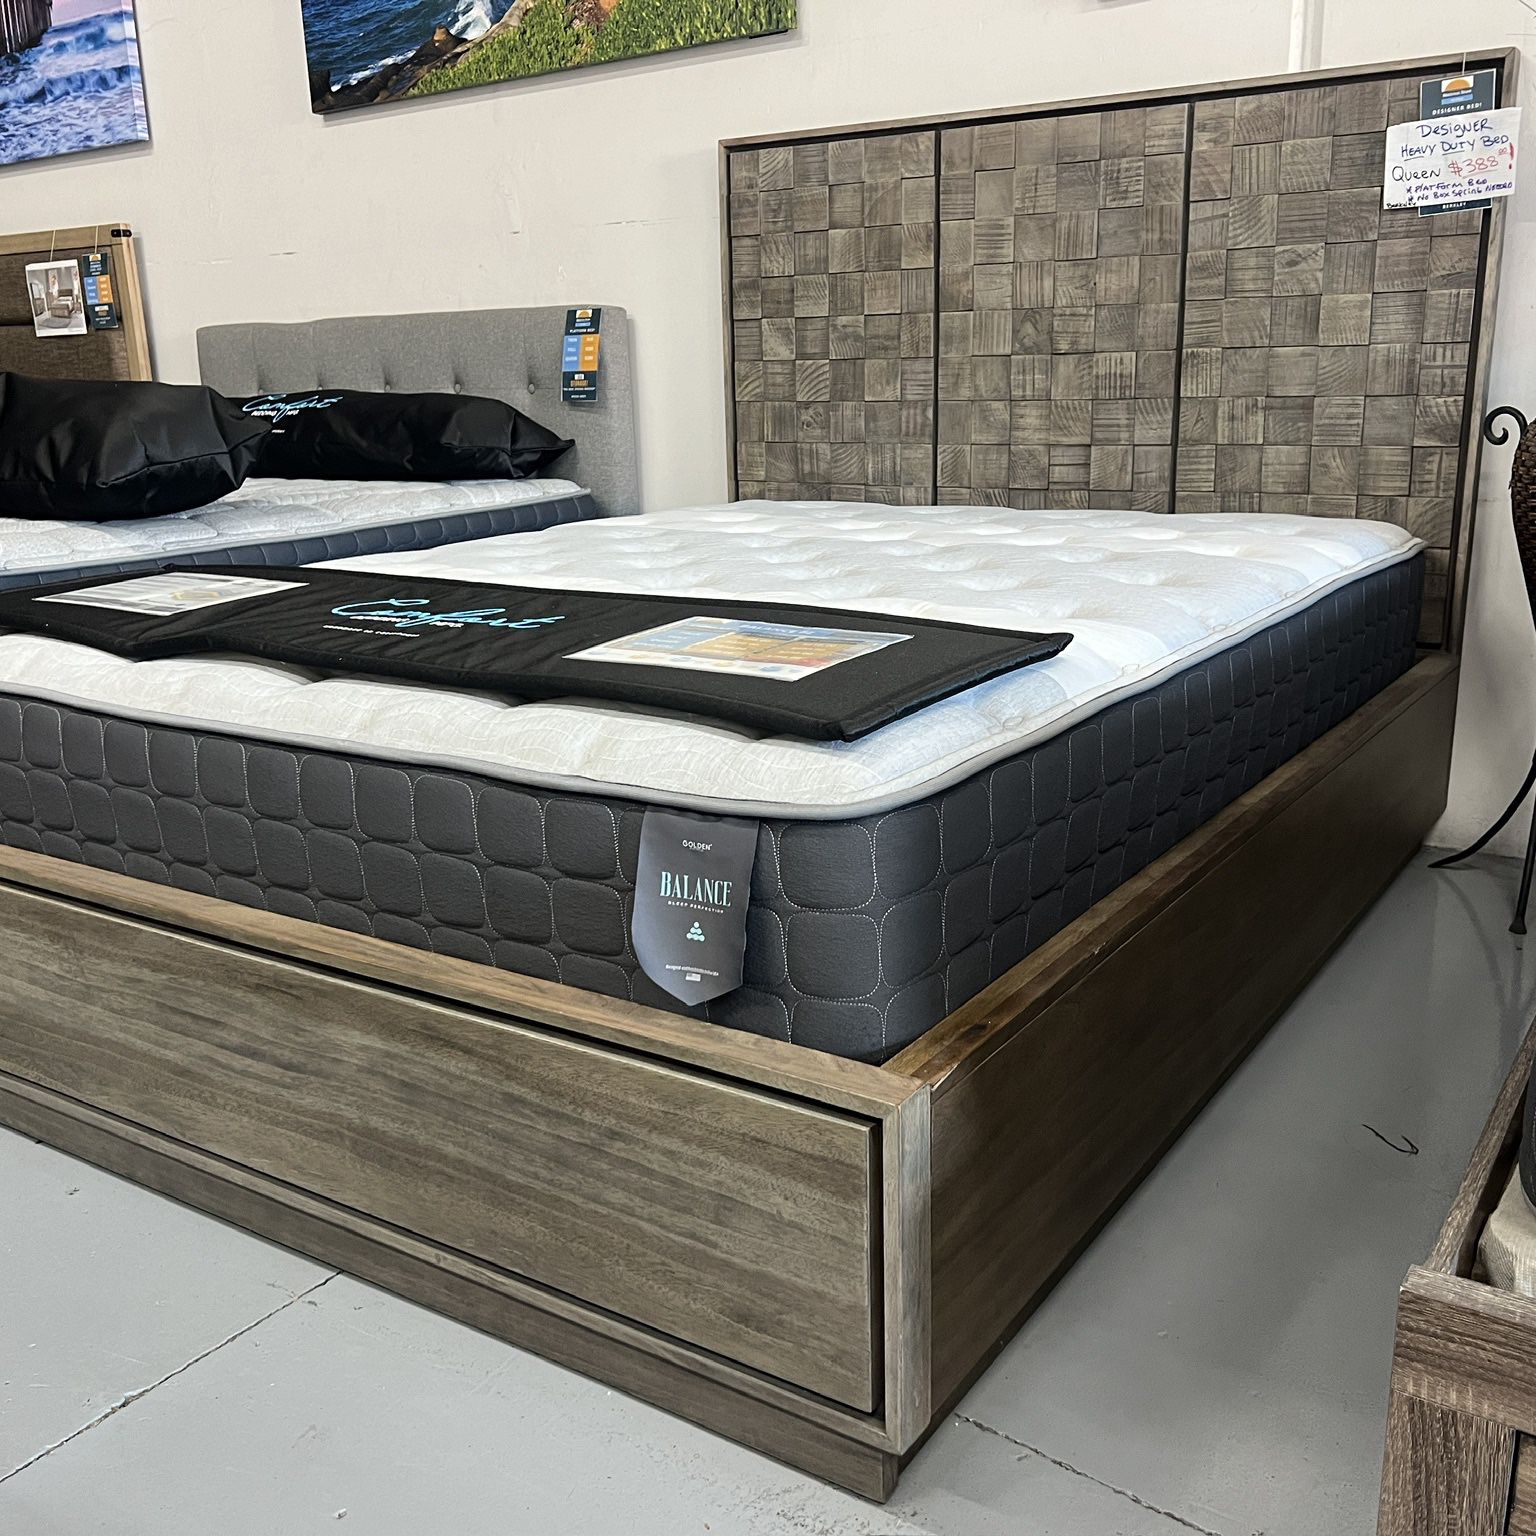 Designer Wooden Platform Bed Heavy Duty By Modus Only avail in Queen $388